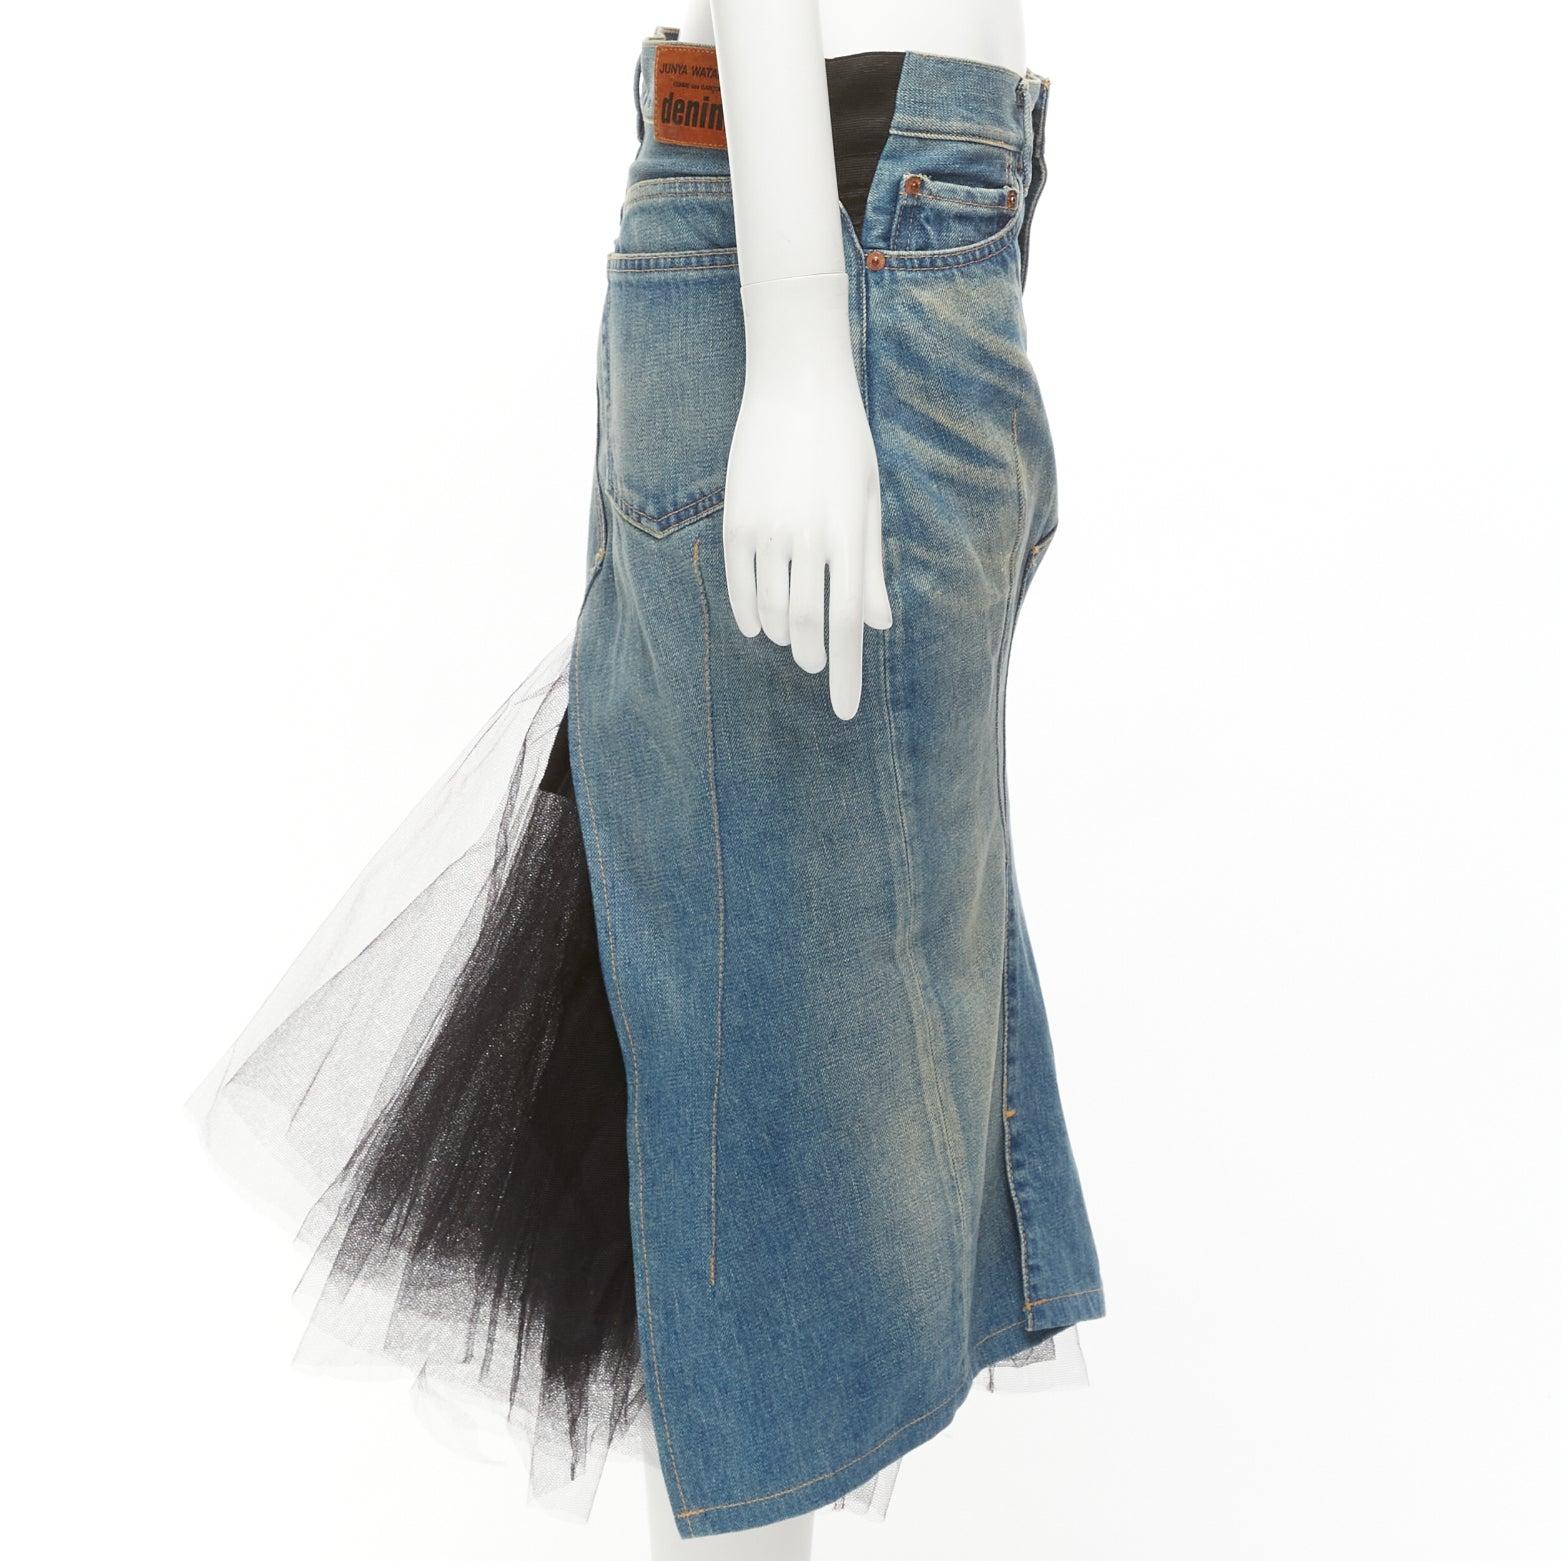 JUNYA WATANABE 2016 blue washed denim black tulle insert back midi skirt S
Reference: DYTG/A00063
Brand: Junya Watanabe
Material: Denim, Tulle
Color: Blue, Black
Pattern: Solid
Closure: Zip Fly
Lining: Black Fabric
Extra Details: Black tulle insert